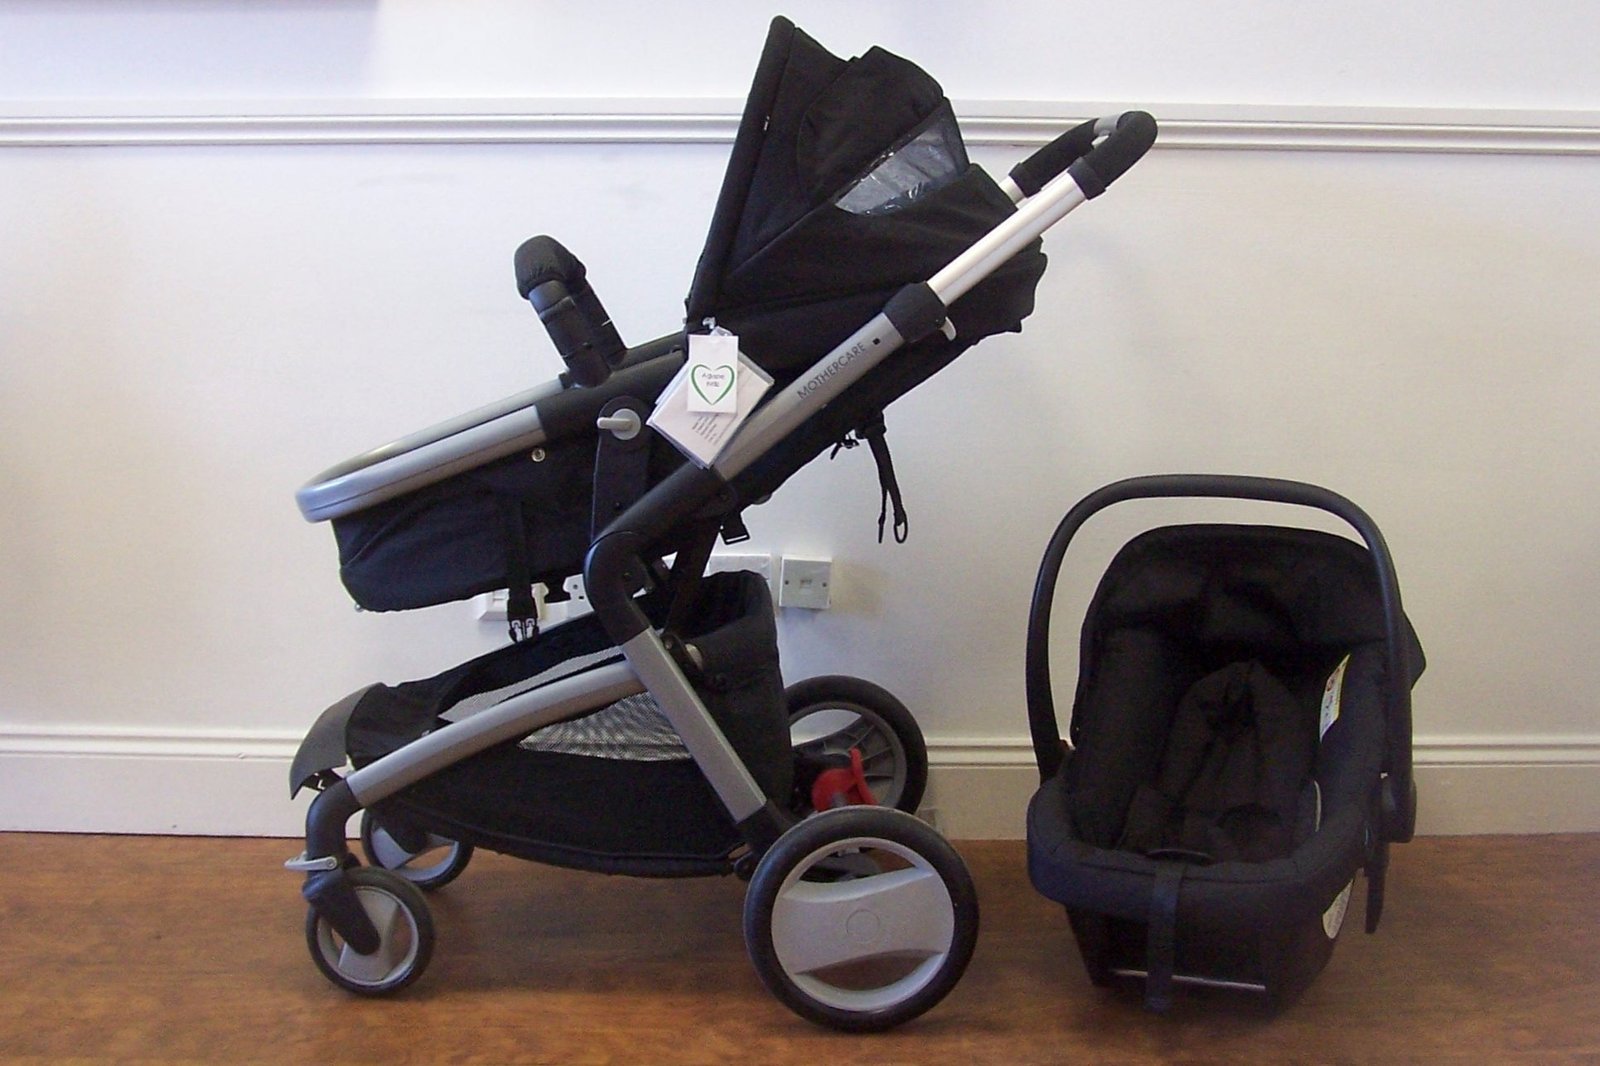 mothercare pushchair with car seat